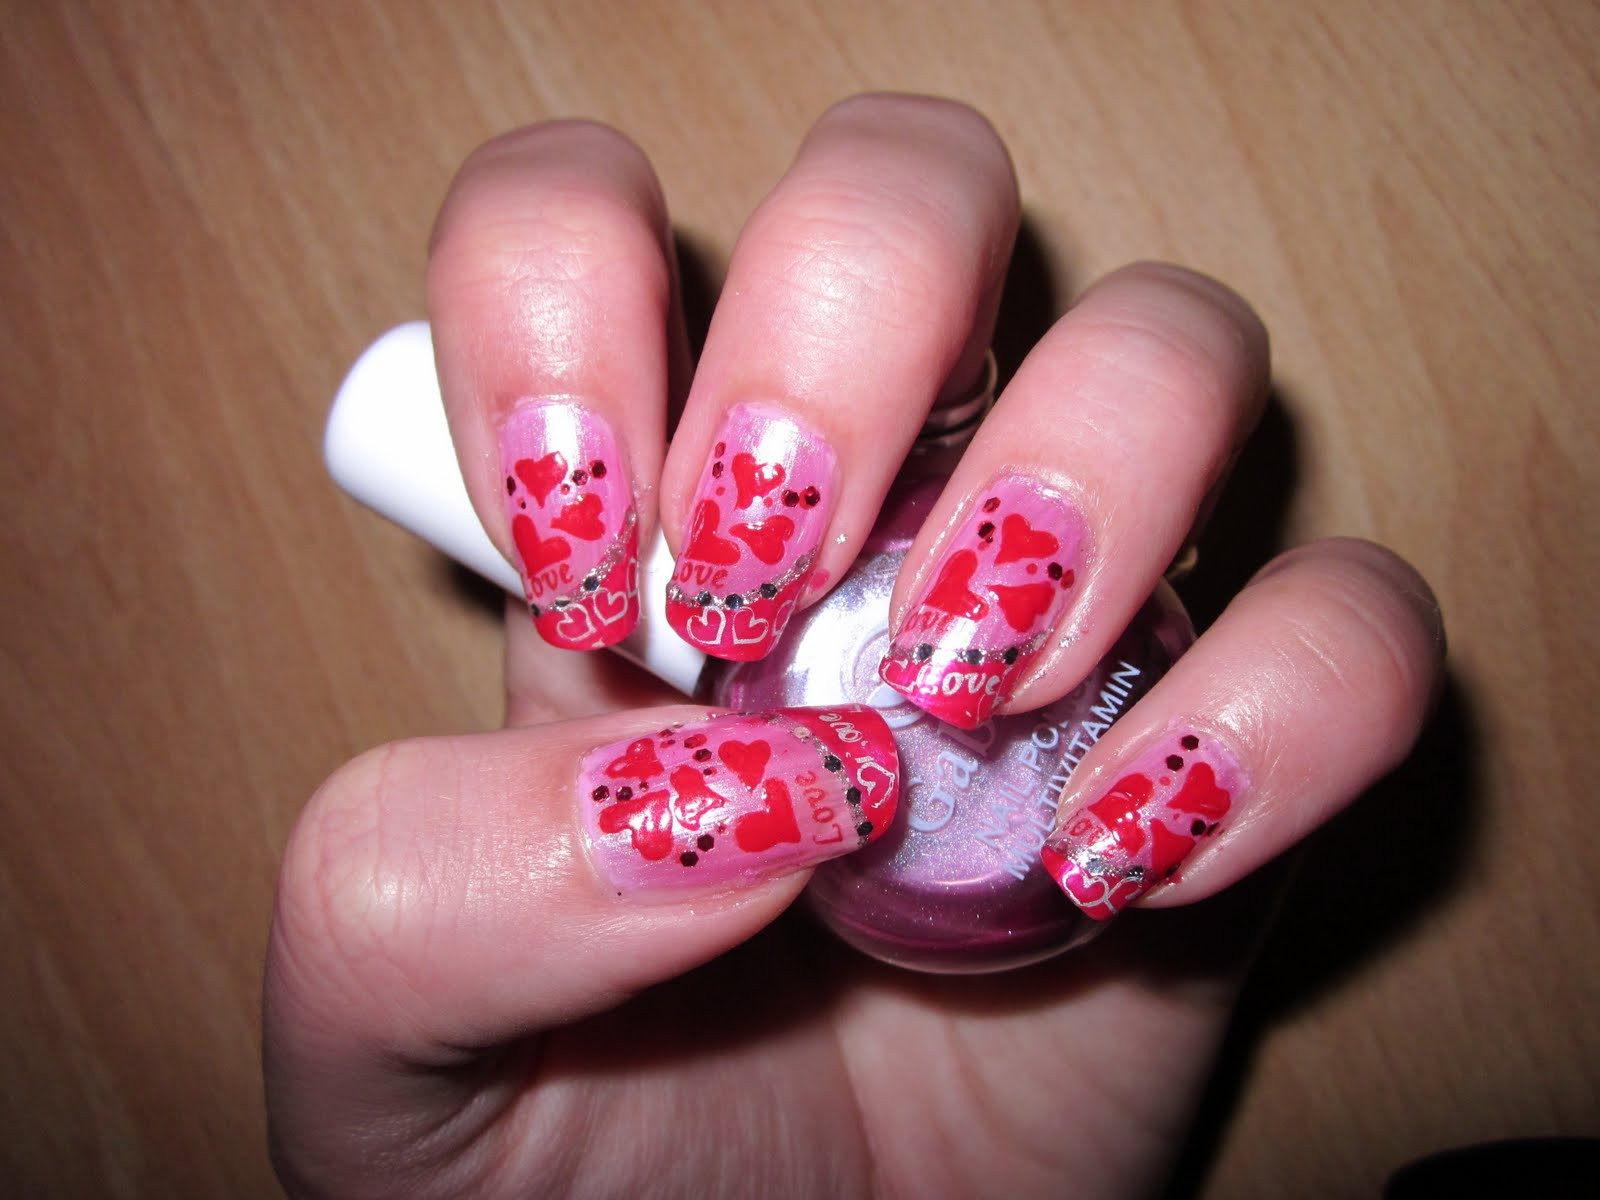 Valentines Acrylic Nail Designs
 acrylic nail art designs [CLOSED] Valentine s day